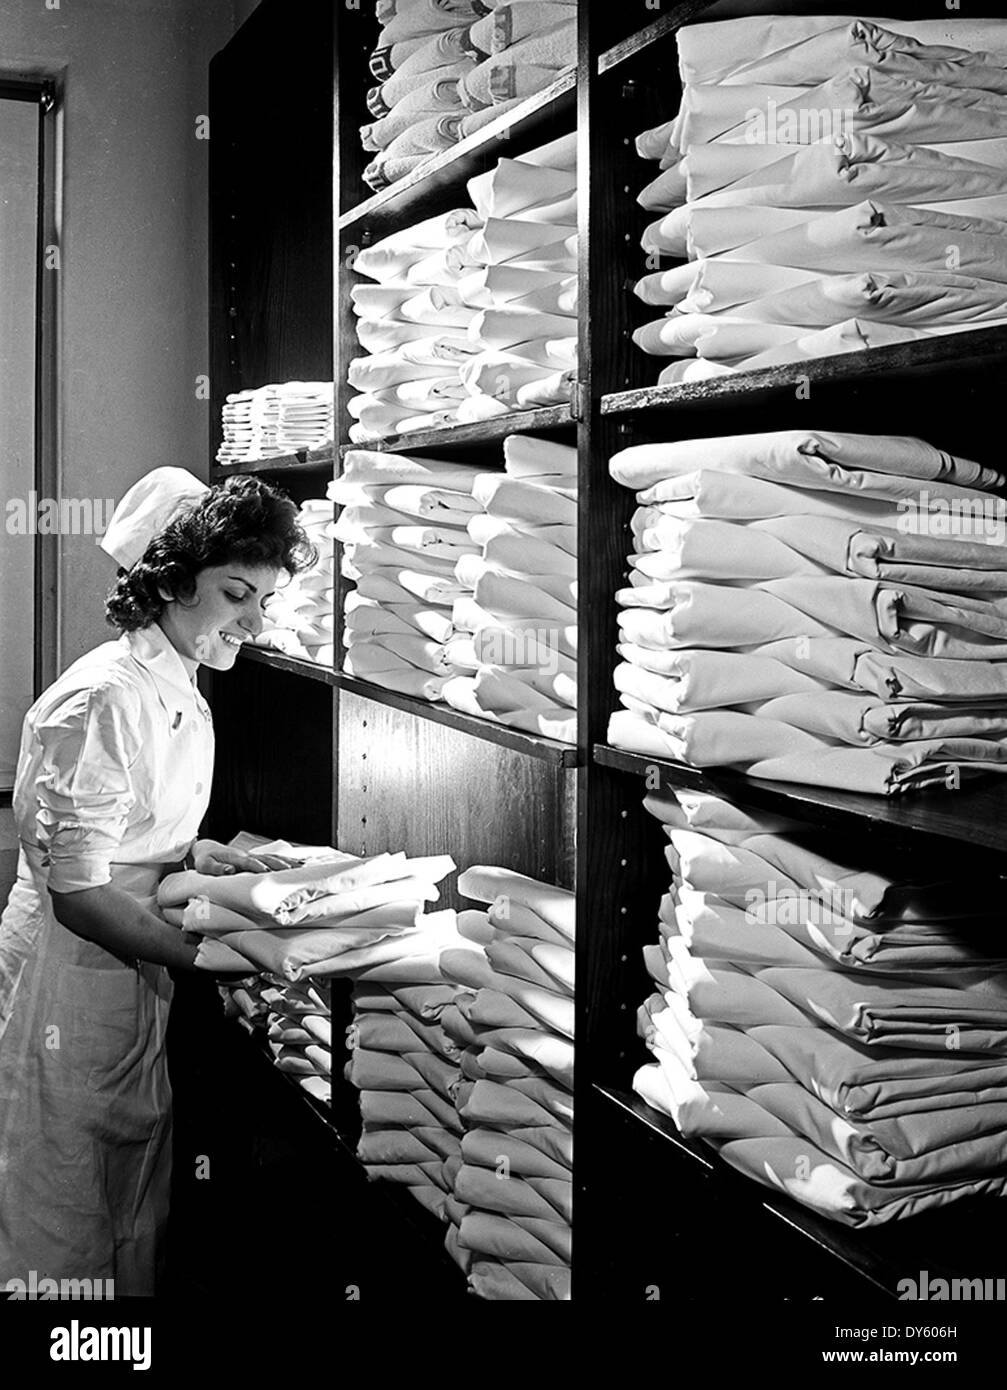 [Nurse in Hospital Linen Closet, Pepperell Manufacturing Company] Stock Photo